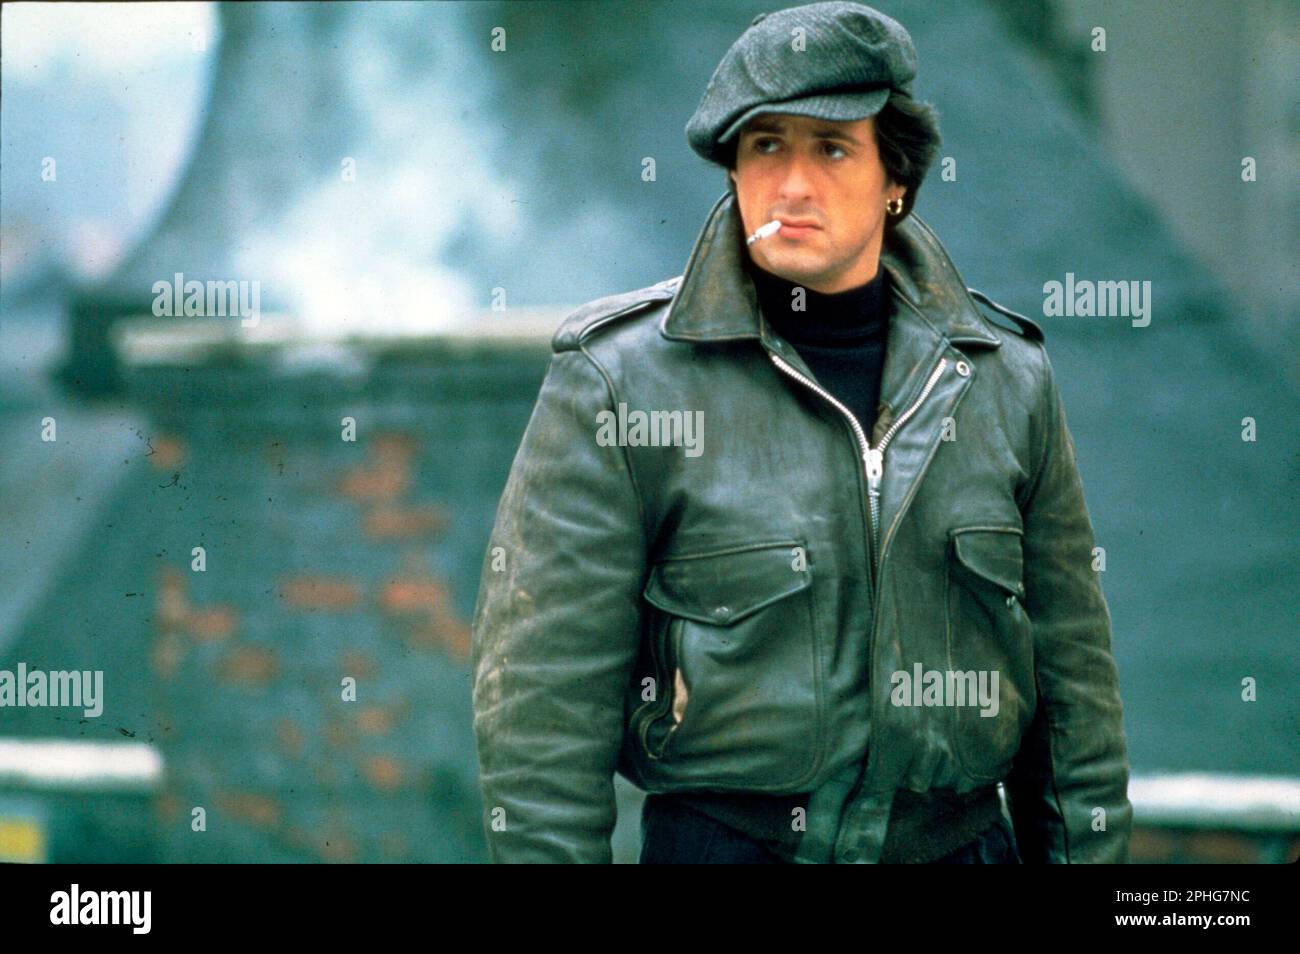 SYLVESTER STALLONE in PARADISE ALLEY (1978), directed by SYLVESTER STALLONE. Credit: UNIVERSAL PICTURES / Album Stock Photo